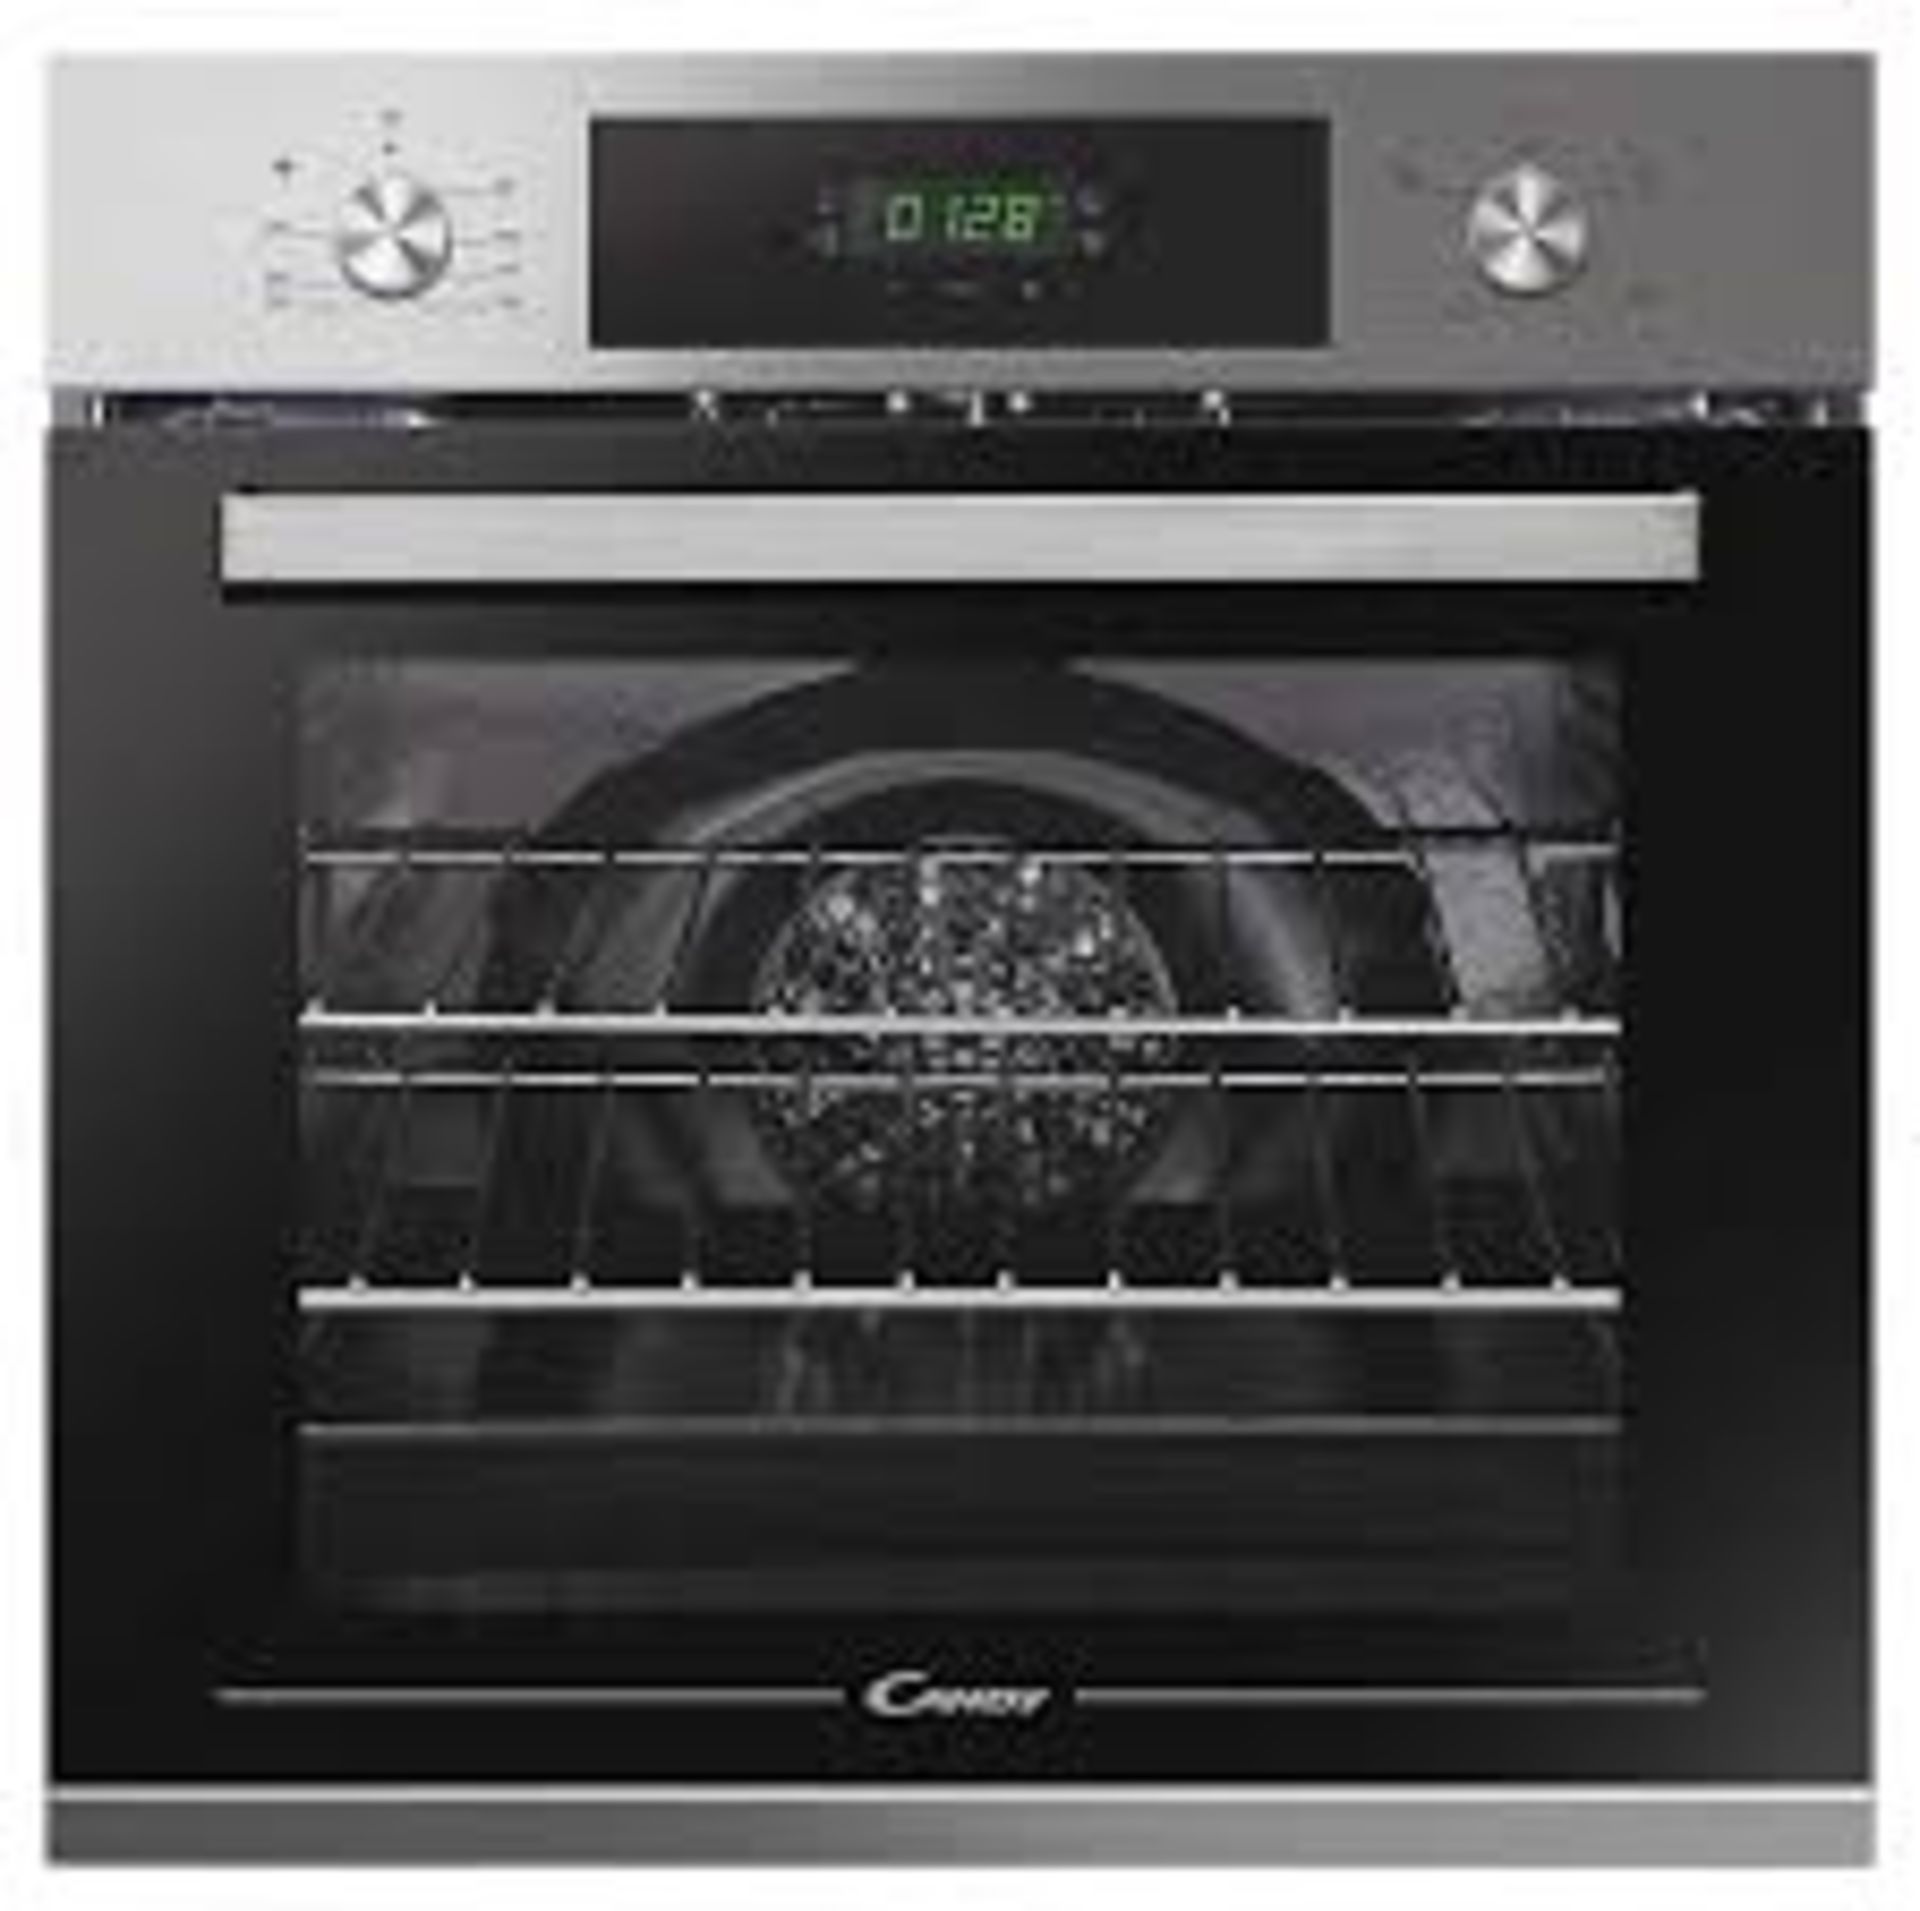 Candy Timeless FCT405X Built-in Single Fan Oven. - P5